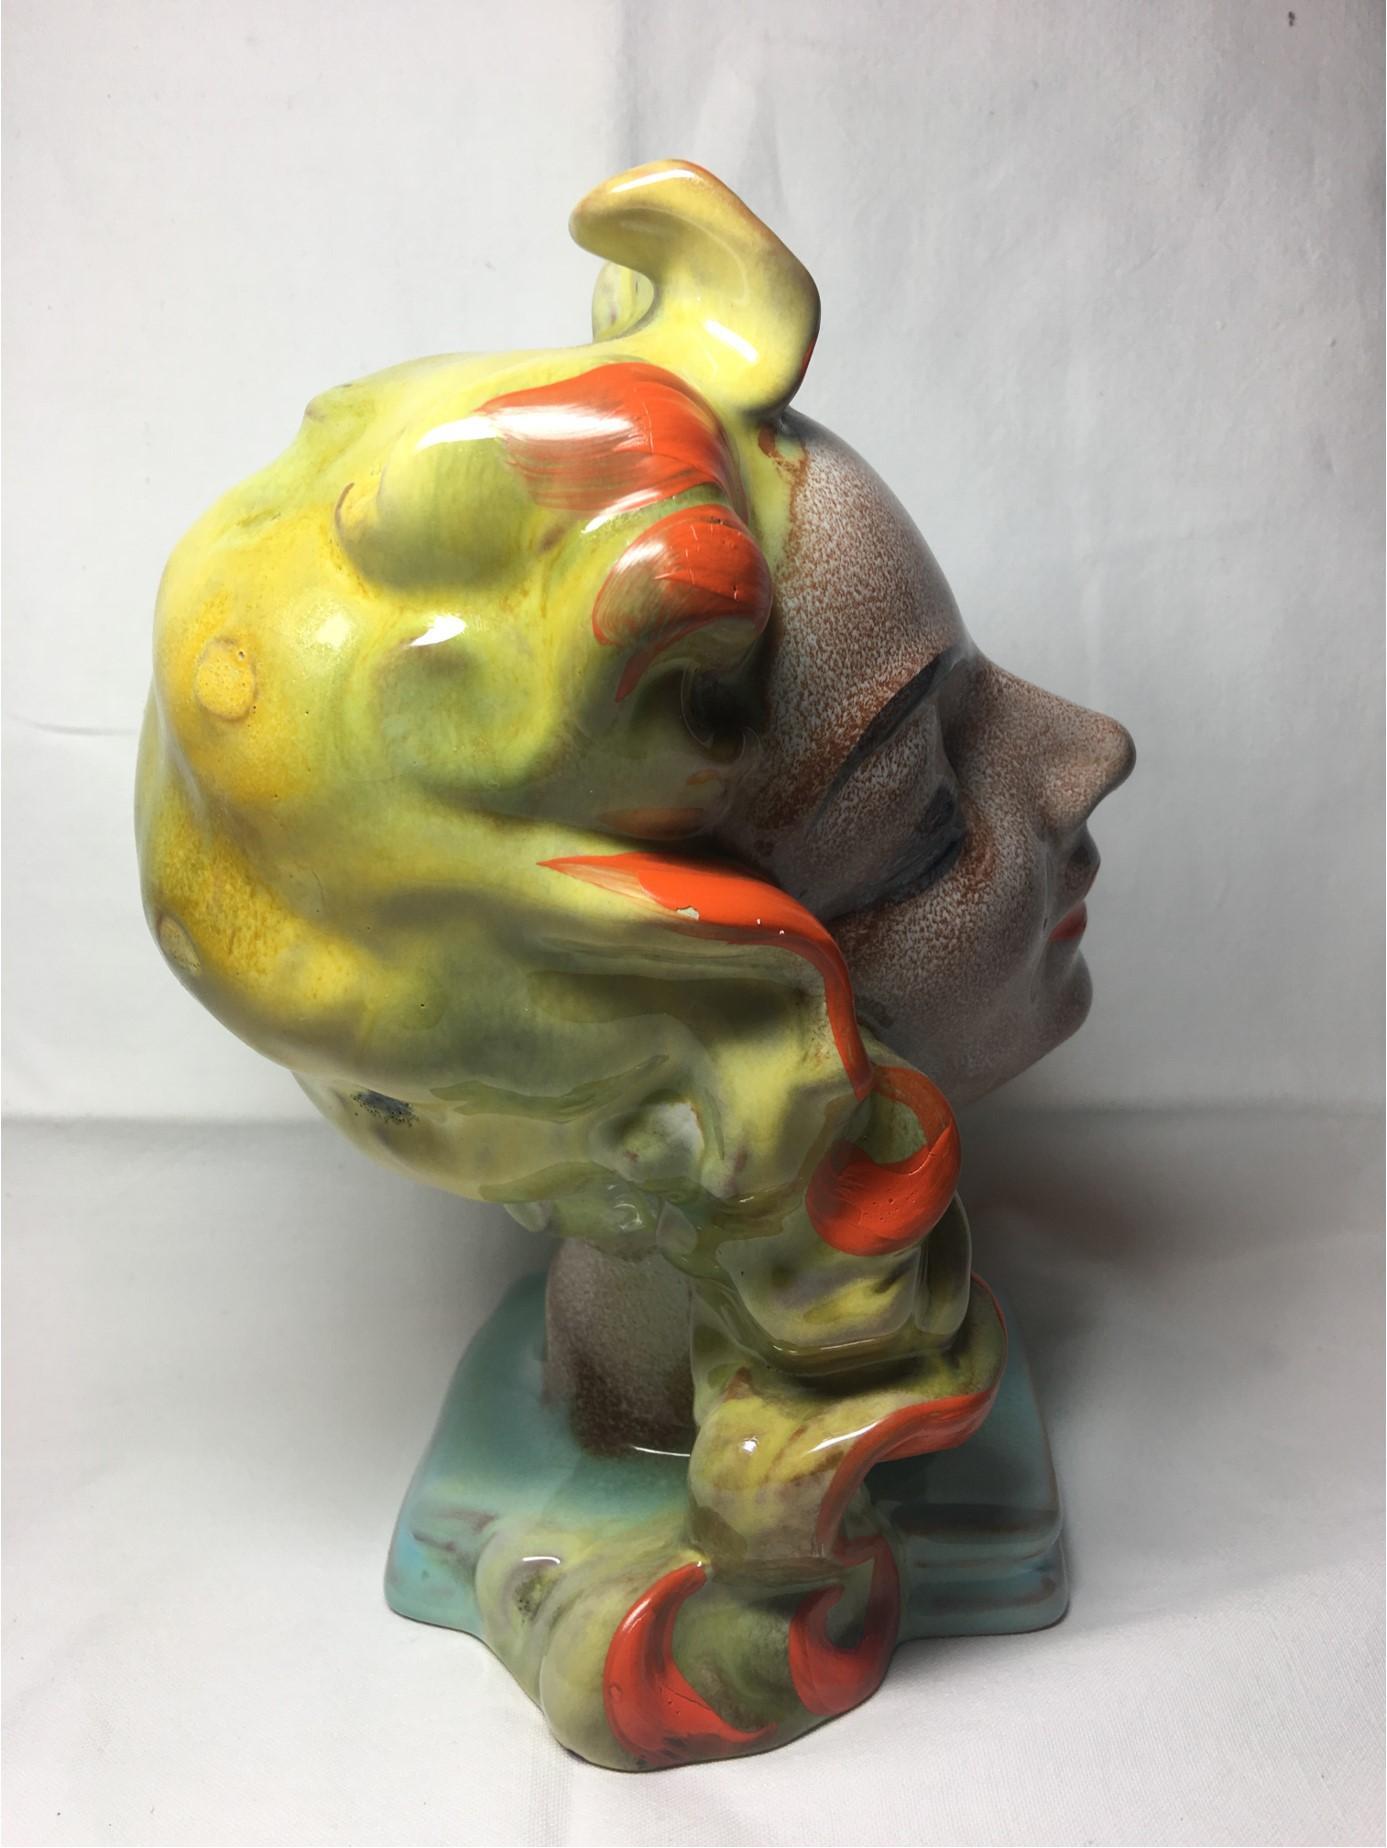 Expressive Art Deco Womans Ceramic Head from the Late 1930s Early 1940s For Sale 1